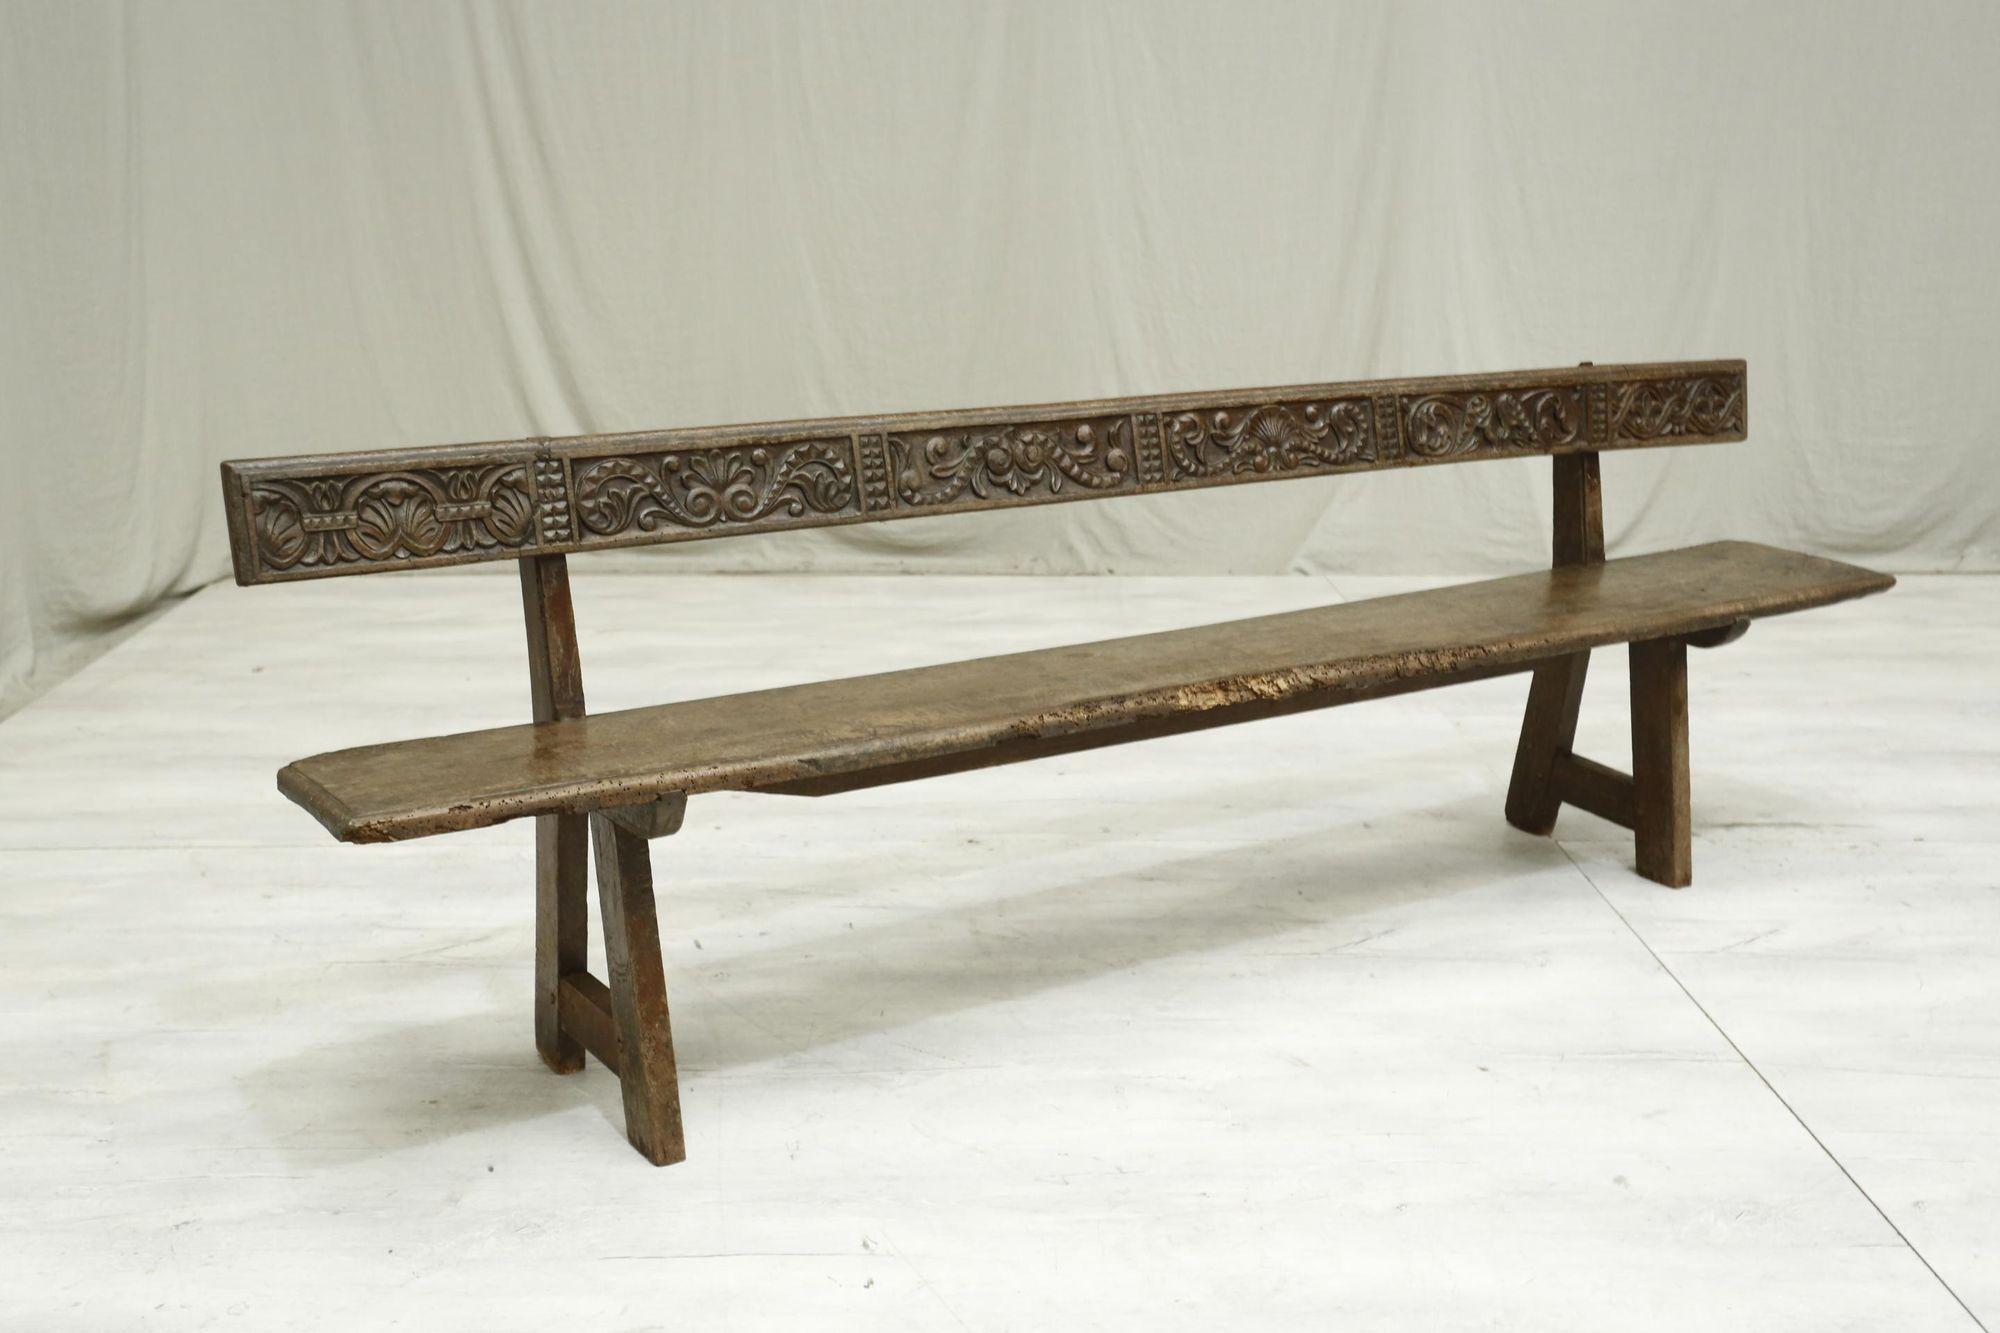 This is a very attractive rustic 19th century Spanish walnut hall bench. The design is very attractively simple but then the deep carved back supports adds a great detail making this a very decorative piece. The whole bench is rustic in its nature